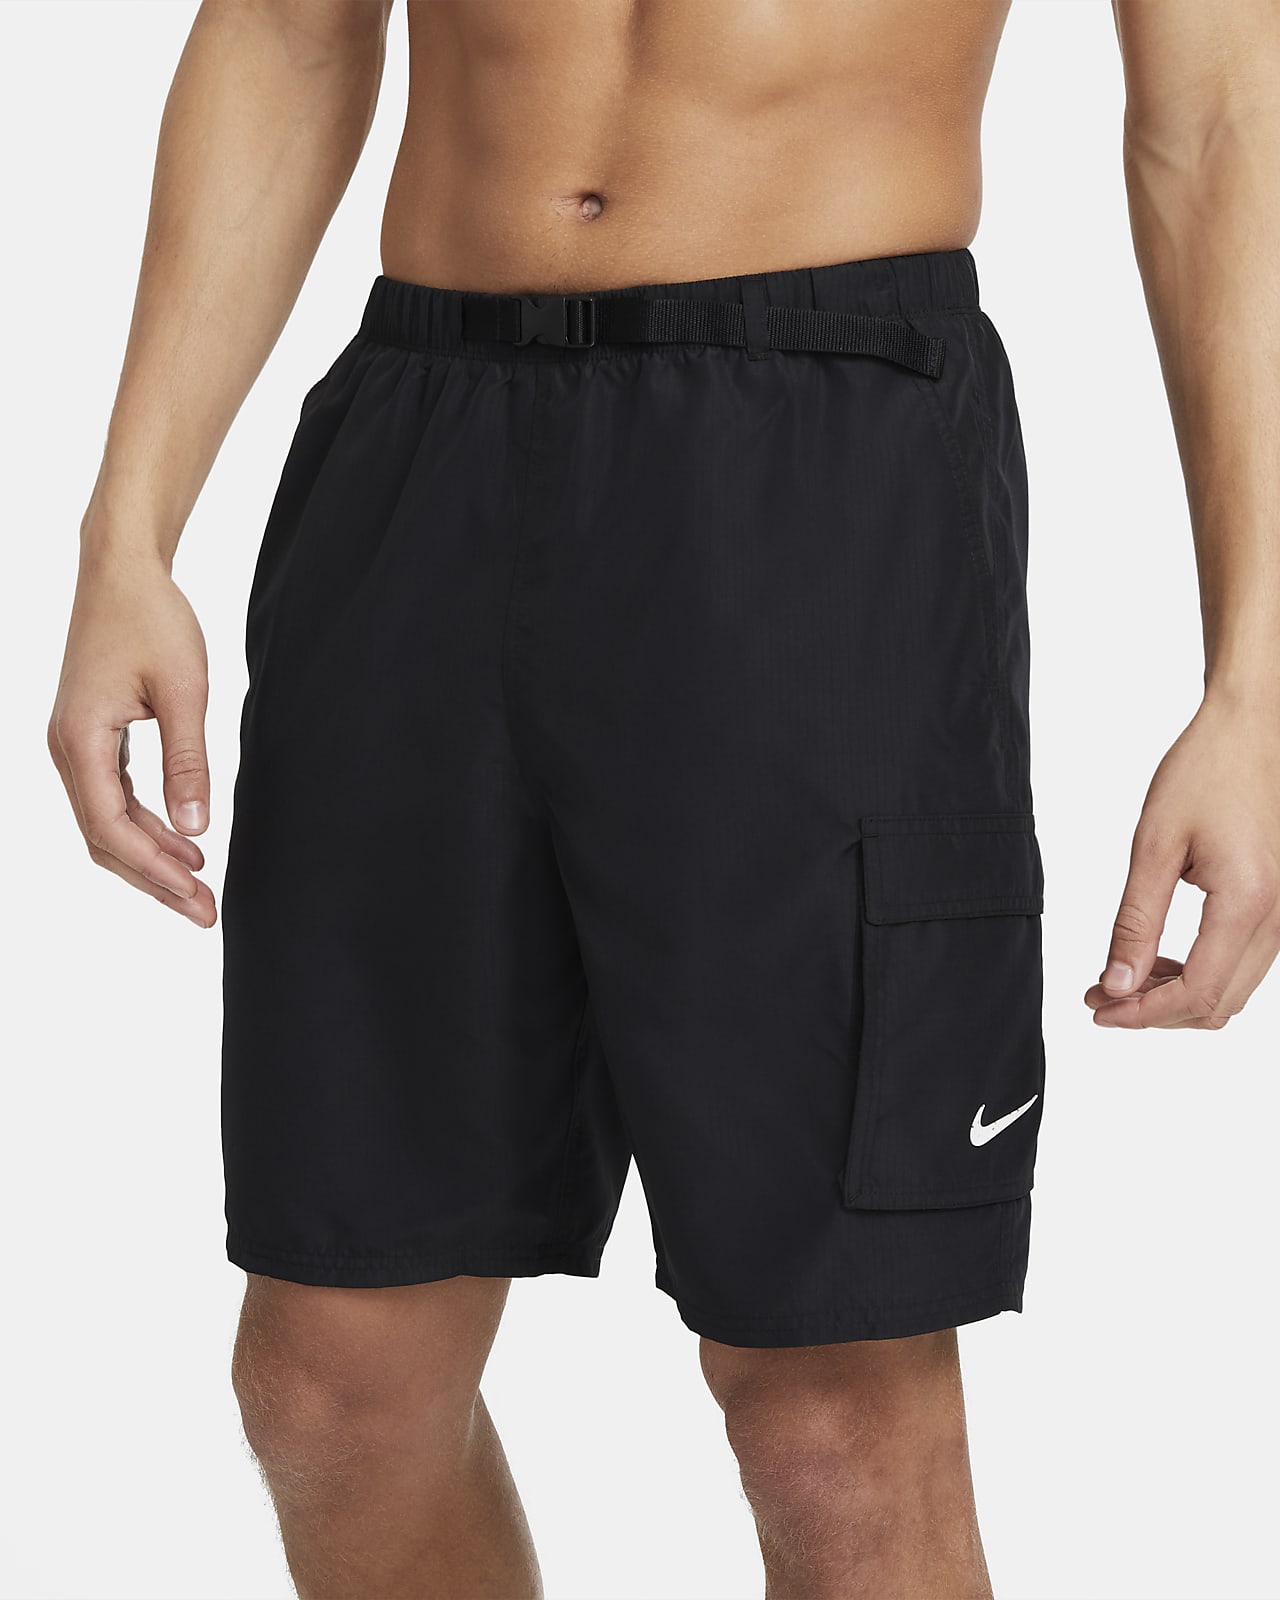 Clearance SALE! Limited time! Nike Swim Trunks size small www.mooequipos.cl